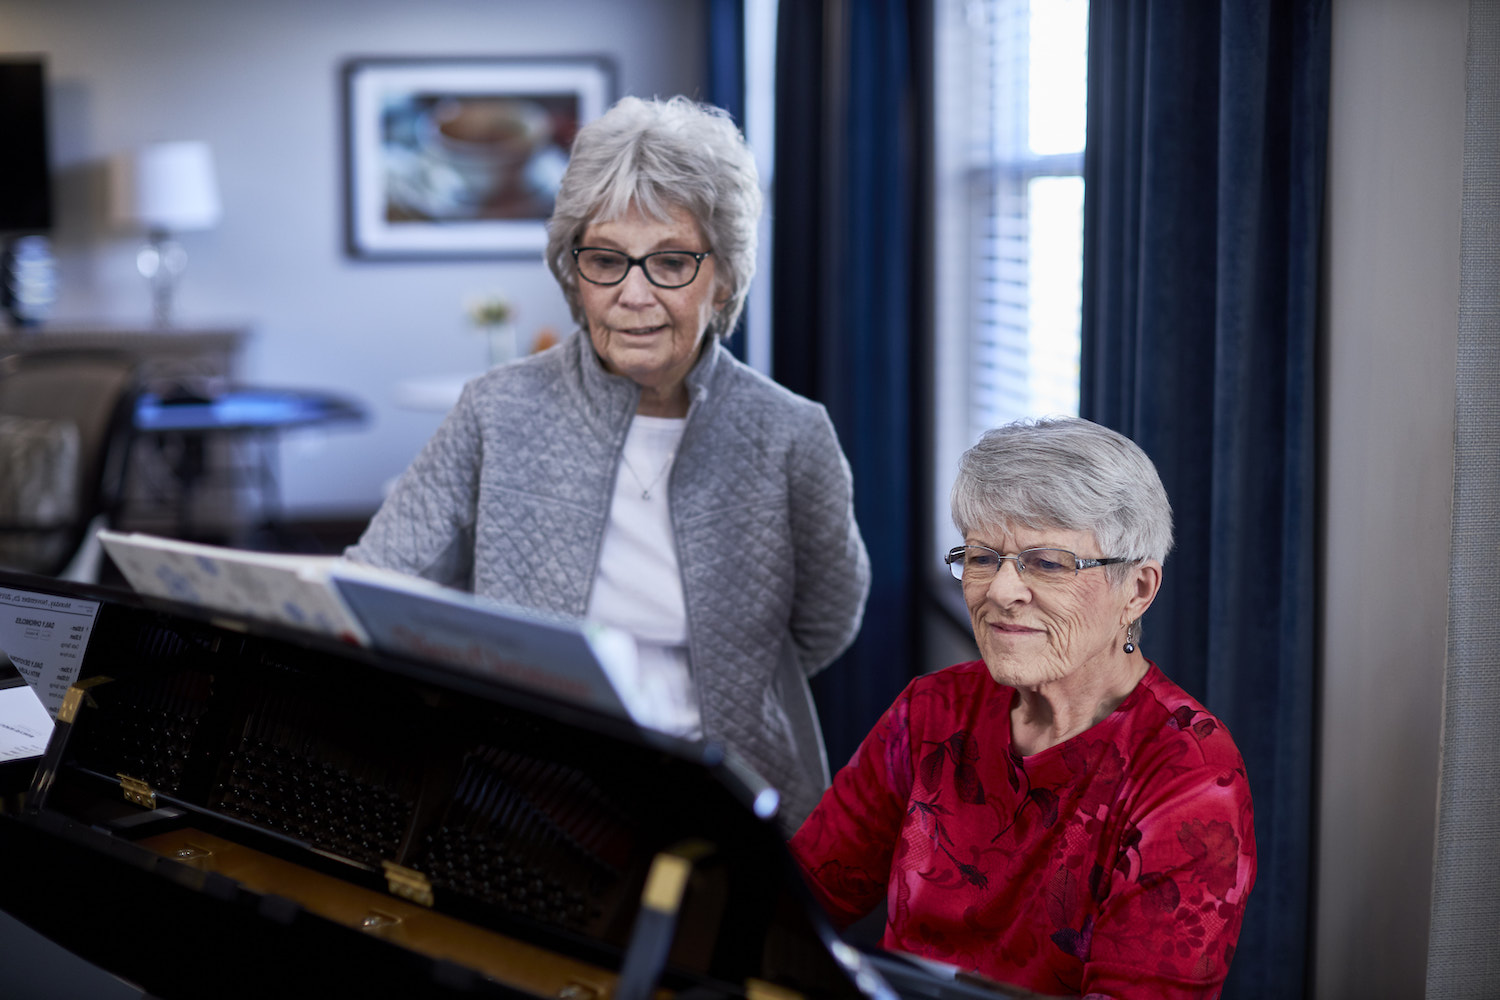 Senior woman playing the piano as another woman sings along